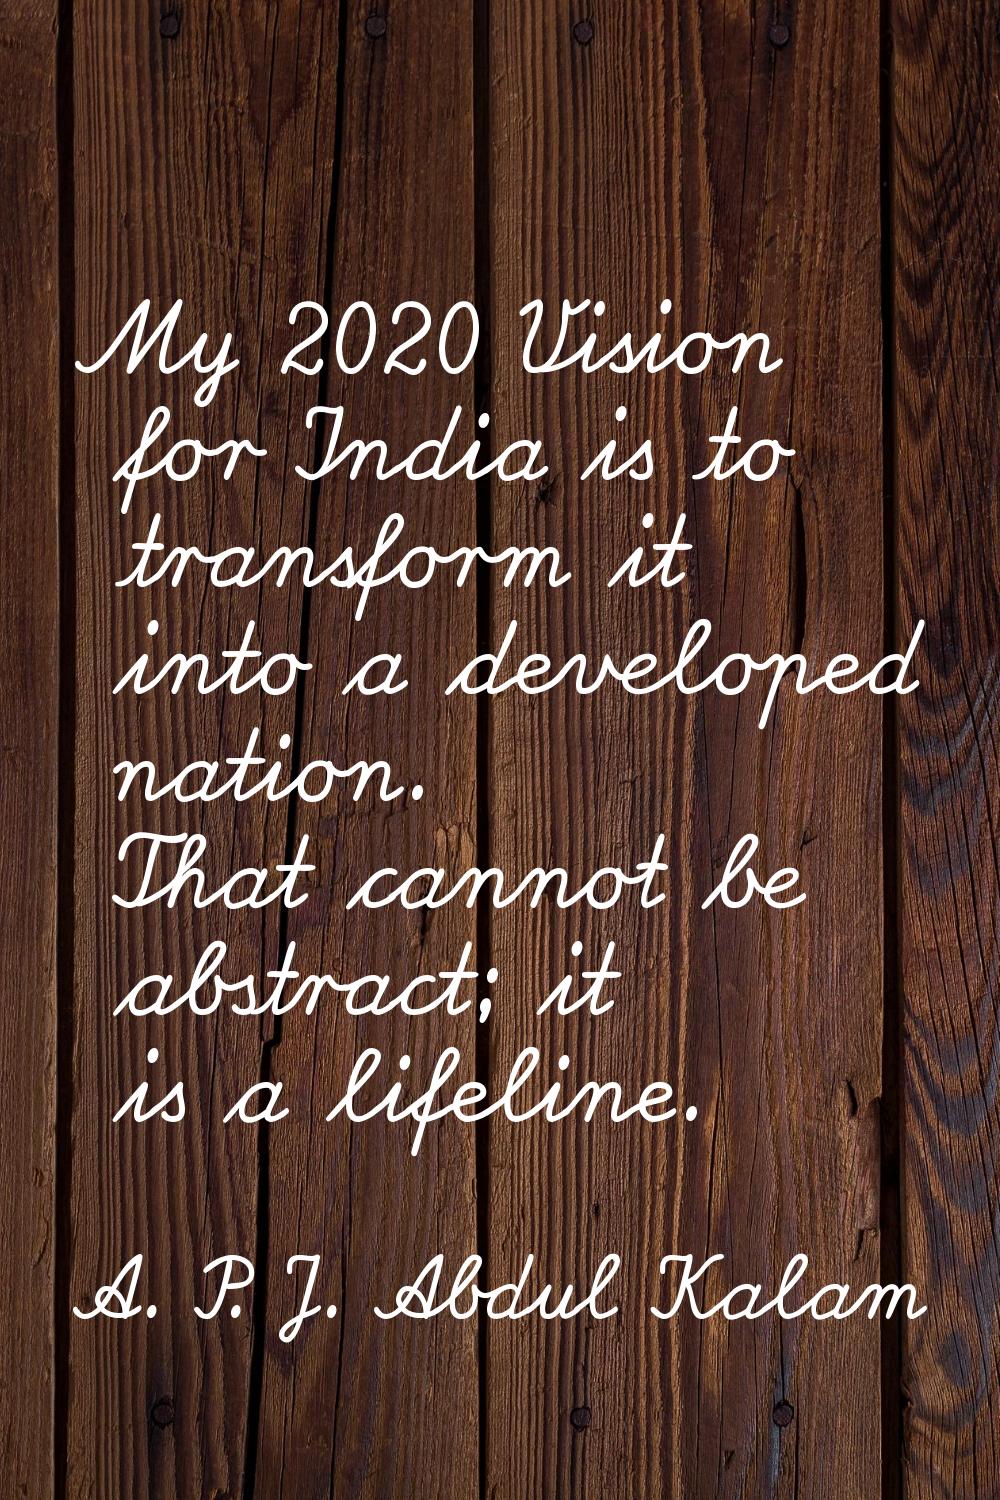 My 2020 Vision for India is to transform it into a developed nation. That cannot be abstract; it is